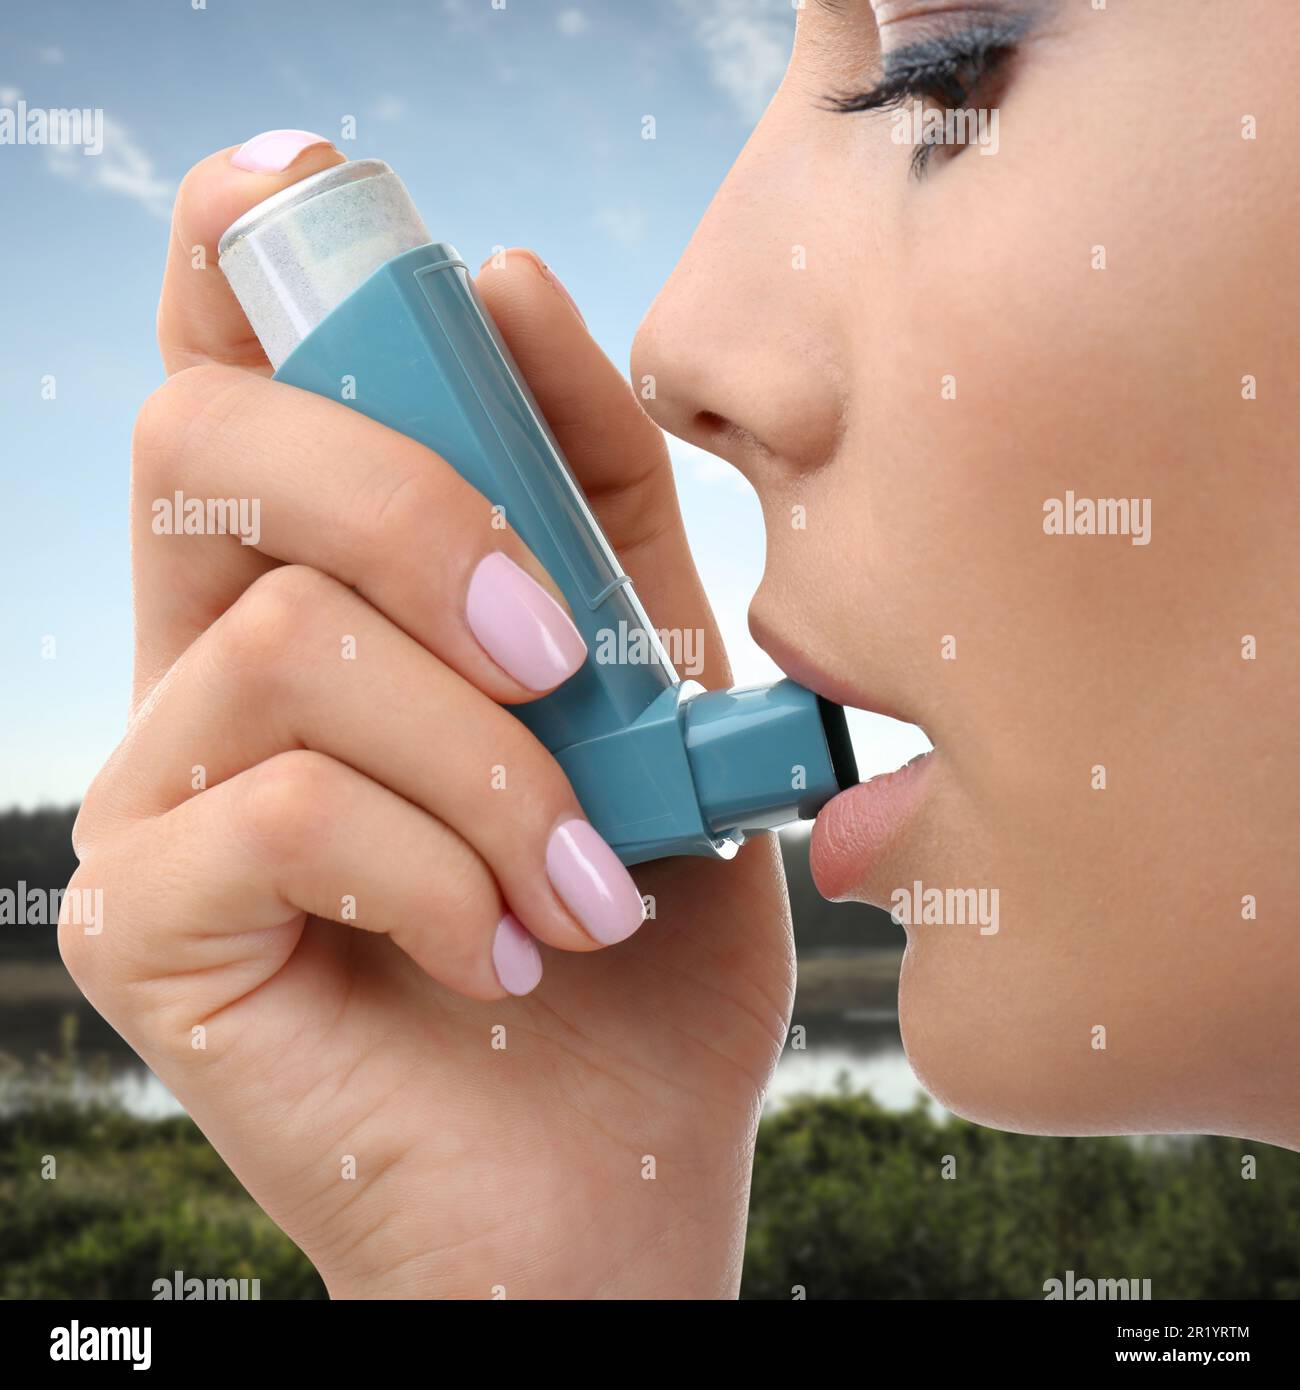 Woman using asthma inhaler, closeup. Emergency first aid during outdoor recreation Stock Photo